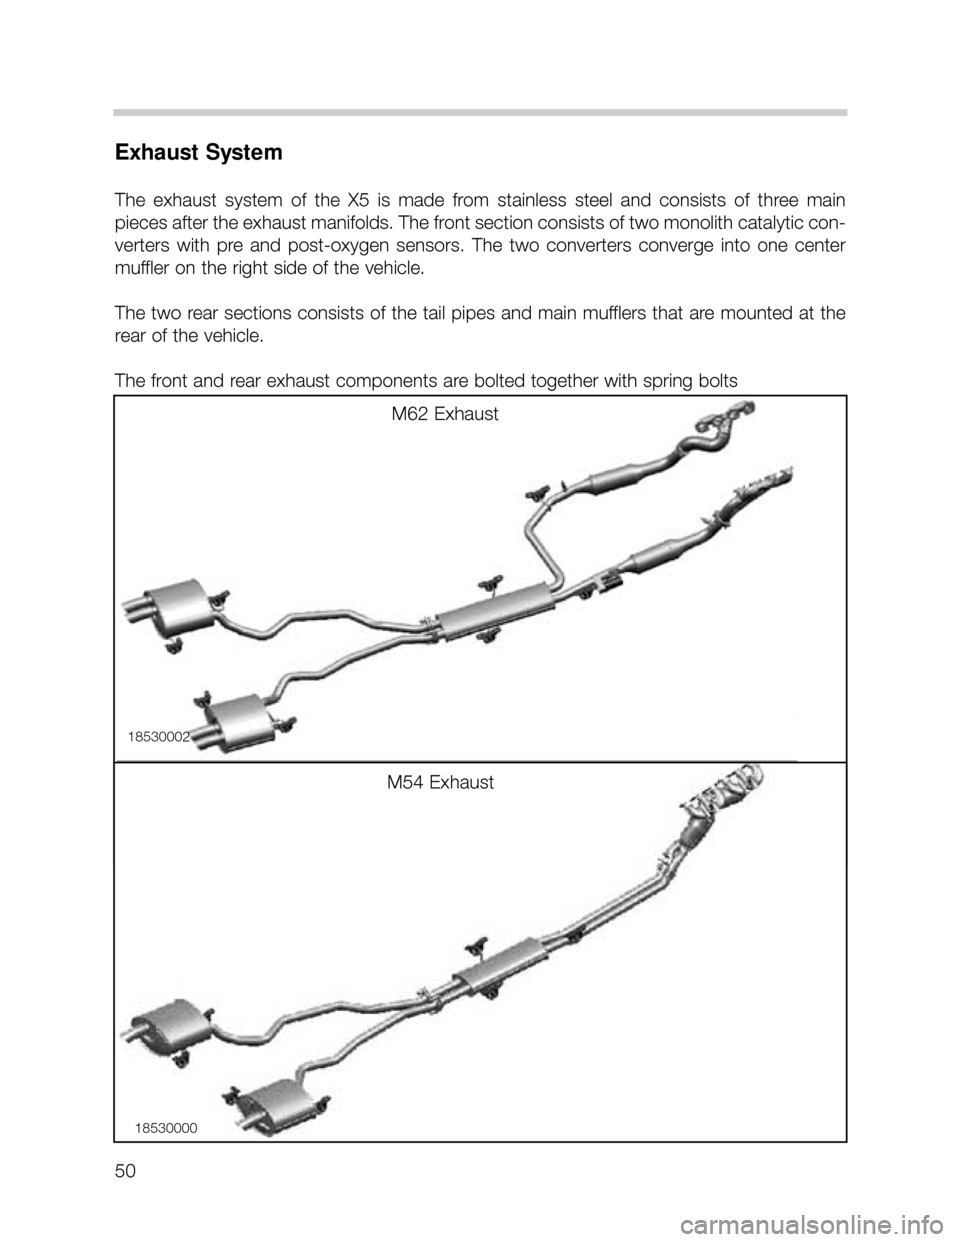 BMW X5 2000 E53 Service Manual 50
Exhaust System
The  exhaust  system  of  the  X5  is  made  from  stainless  steel  and  consists  of  three  main
pieces after the exhaust manifolds. The front section consists of two monolith cat